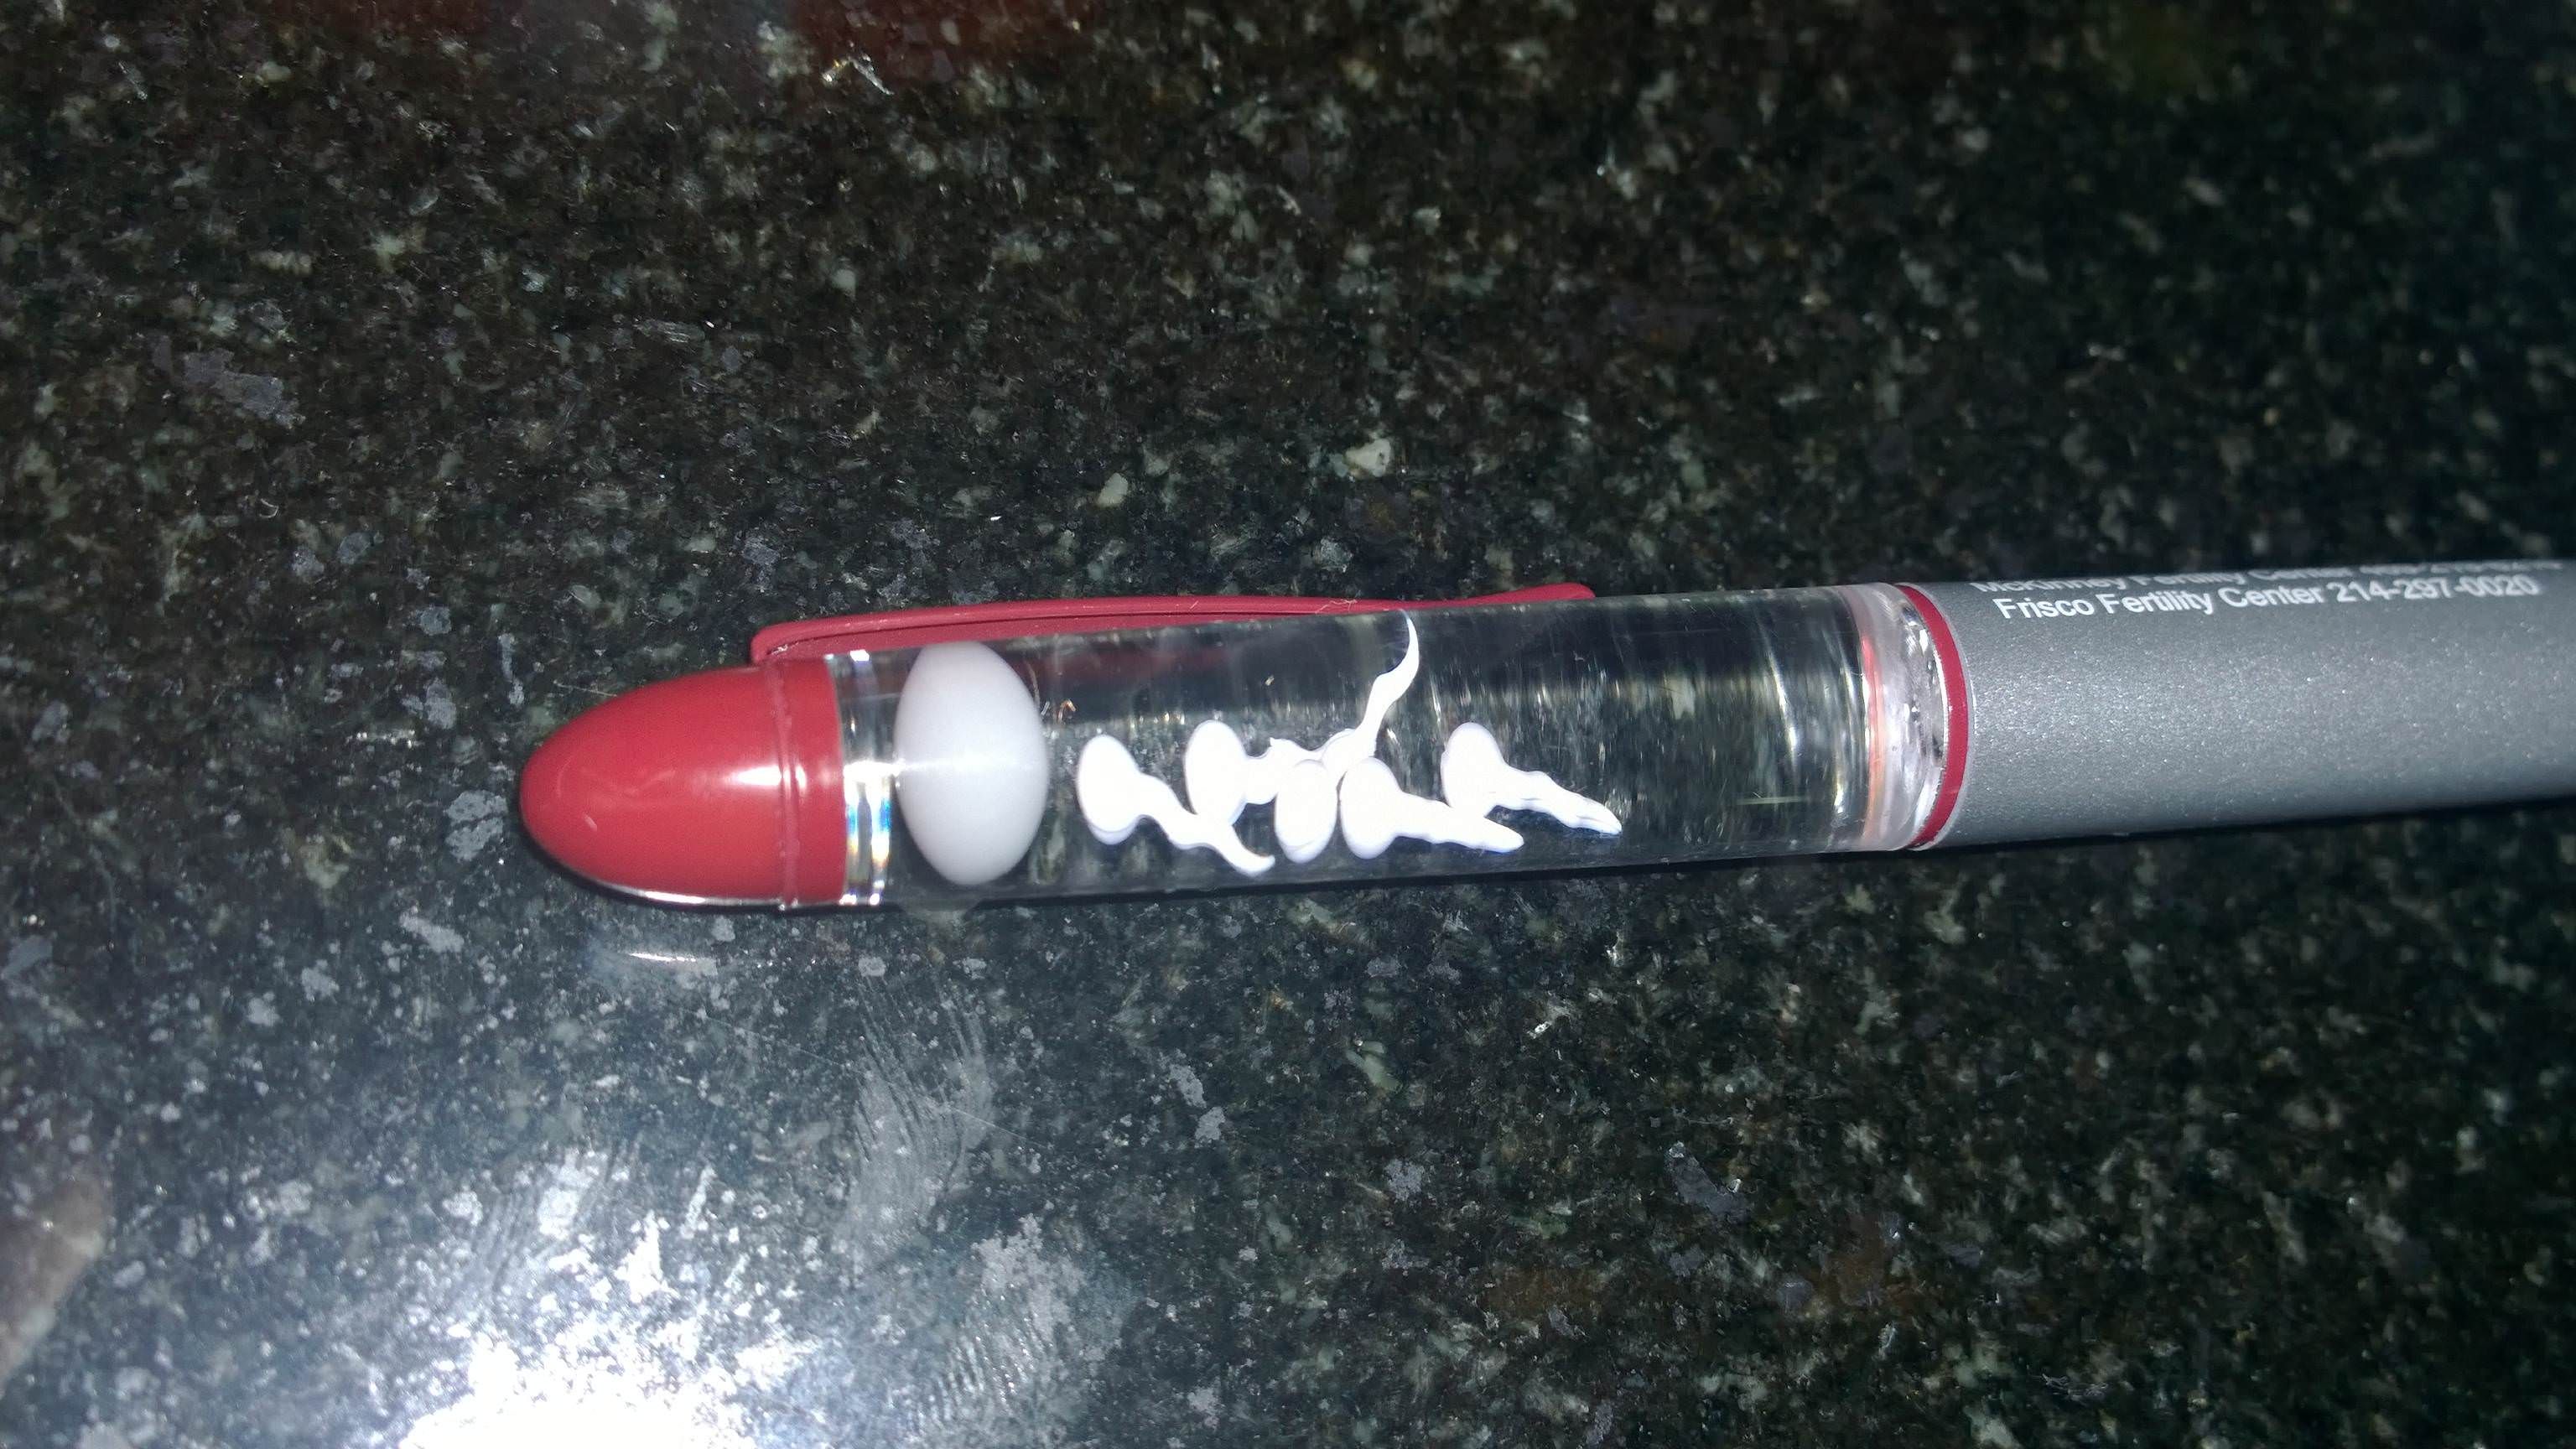 This pen came from a fertility clinic.